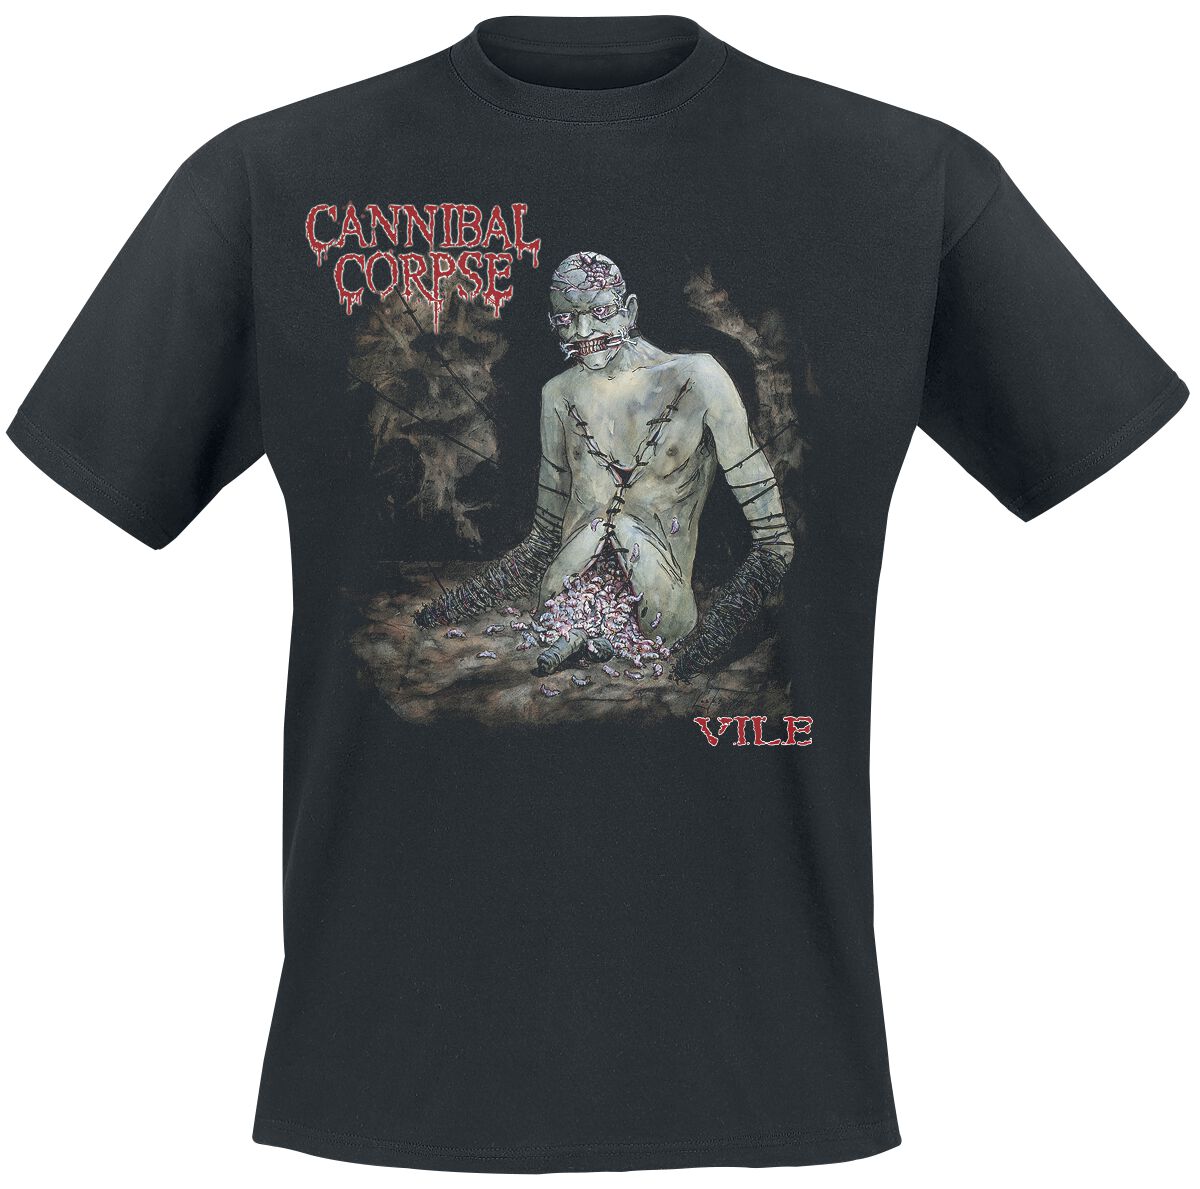 Image of Cannibal Corpse Vile T-Shirt schwarz